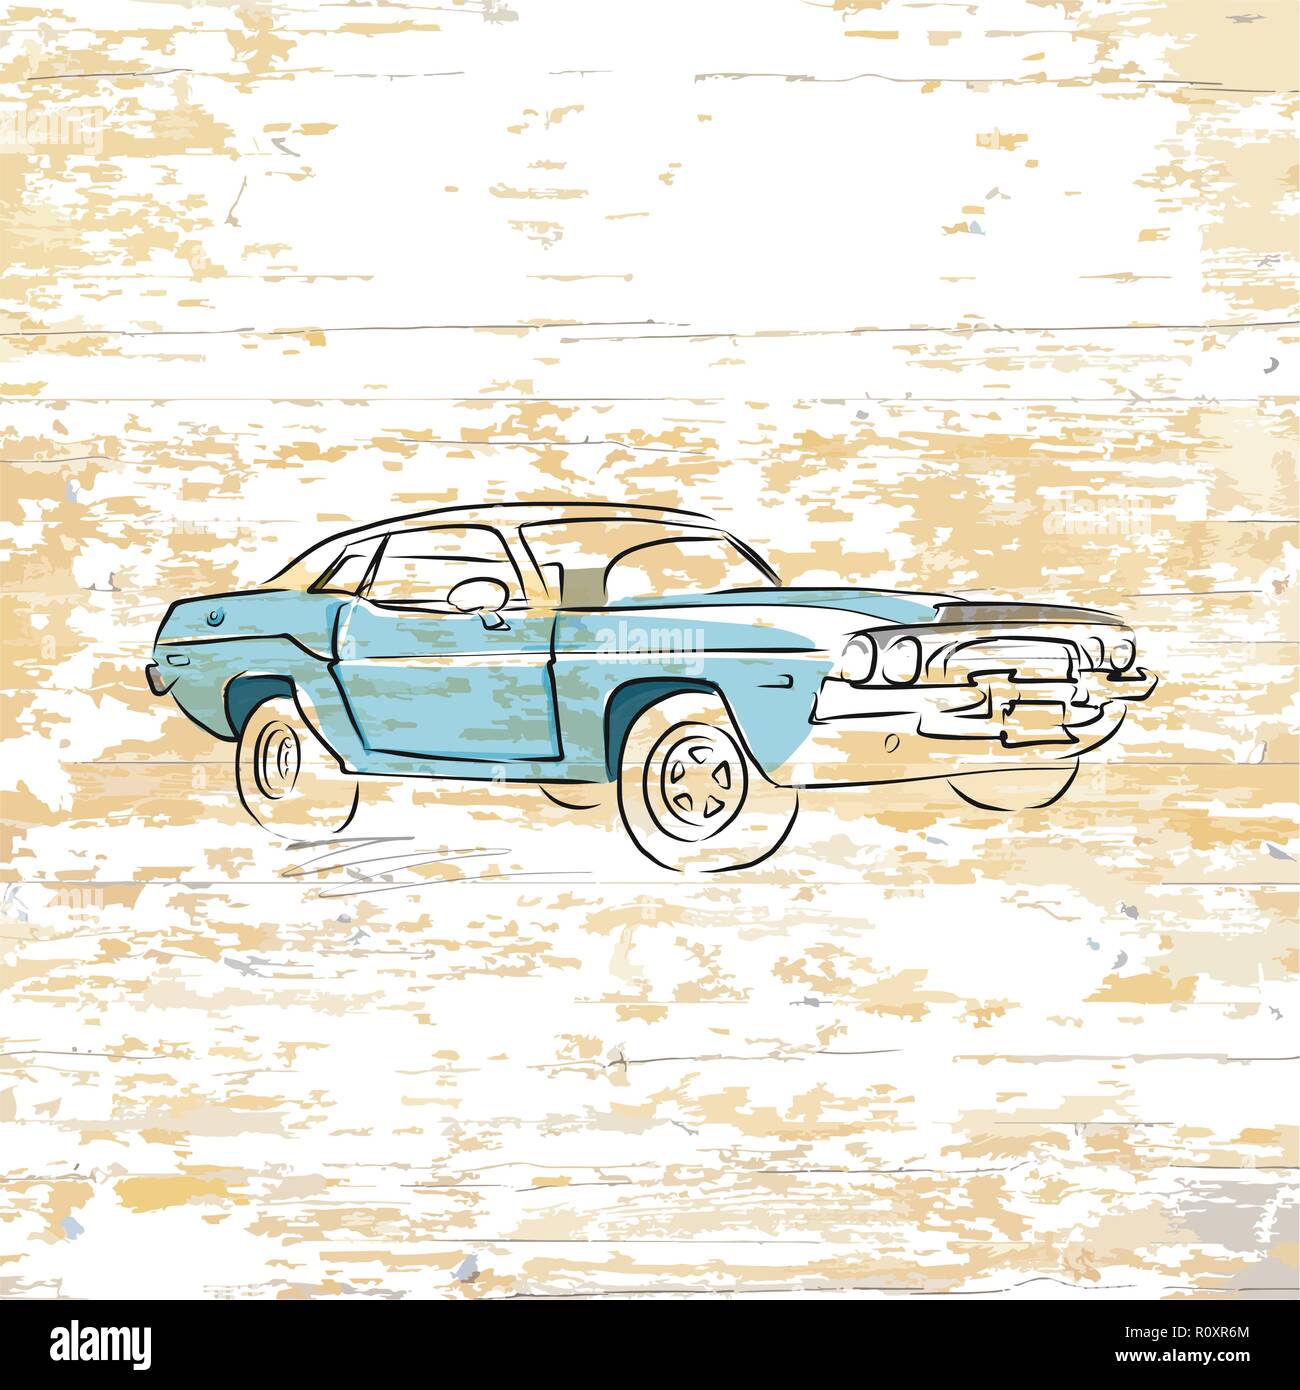 Vintage car drawing on wooden background. Vector illustration drawn by hand. Stock Vector